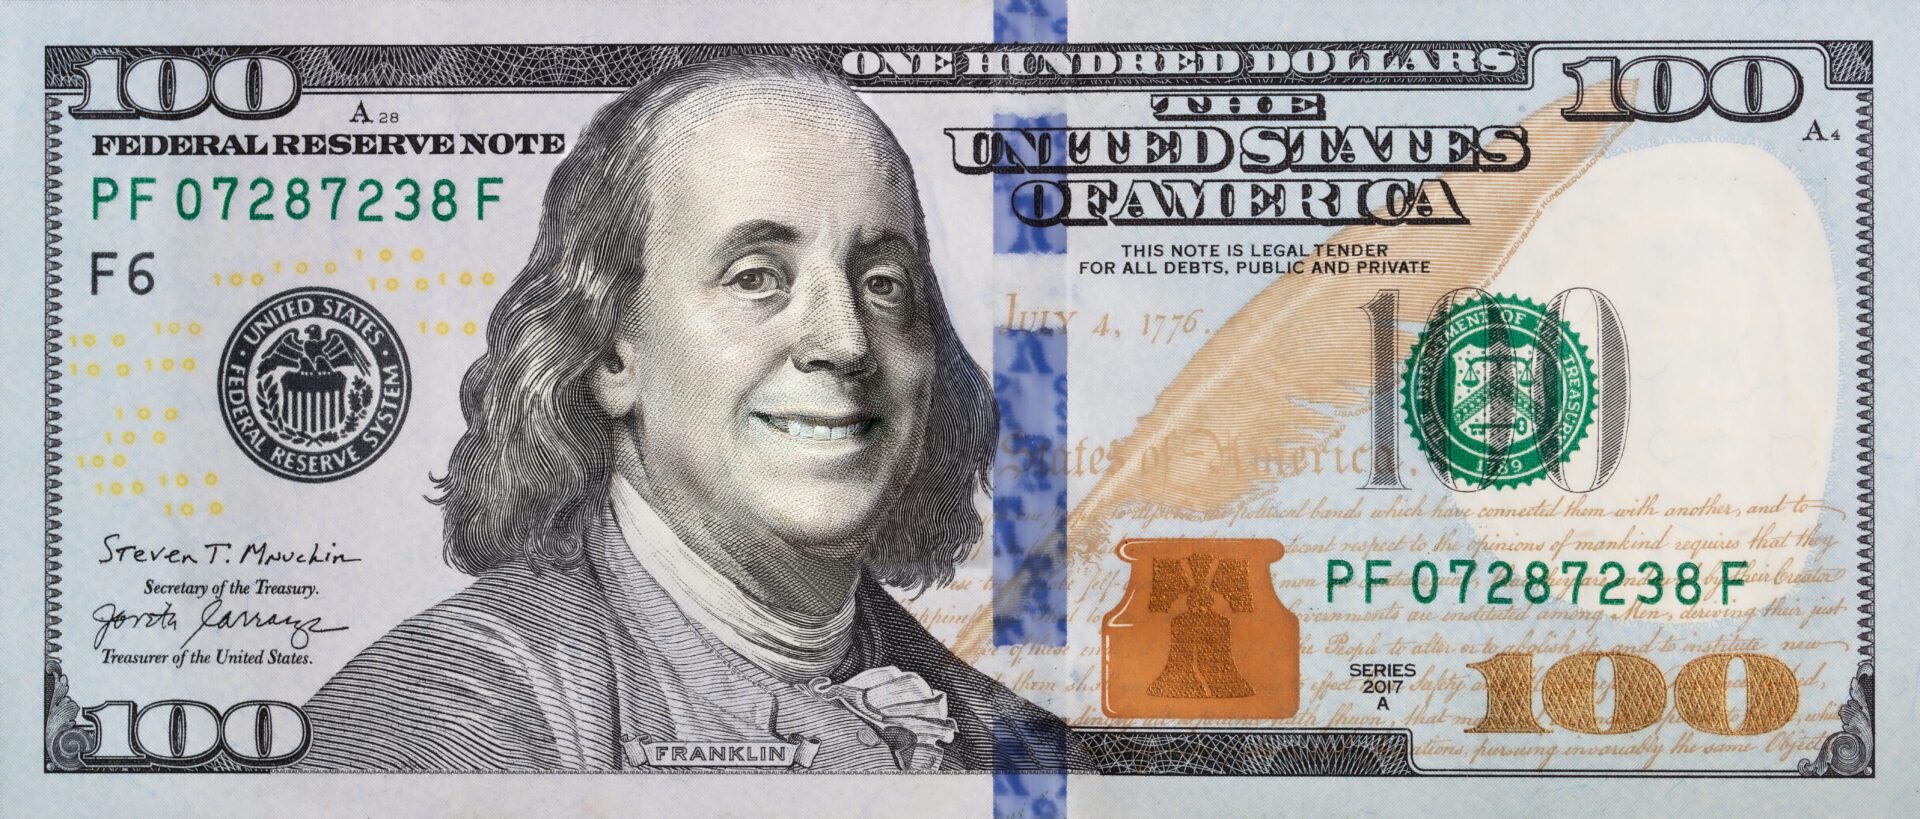 A close up of the face on a one hundred dollar bill